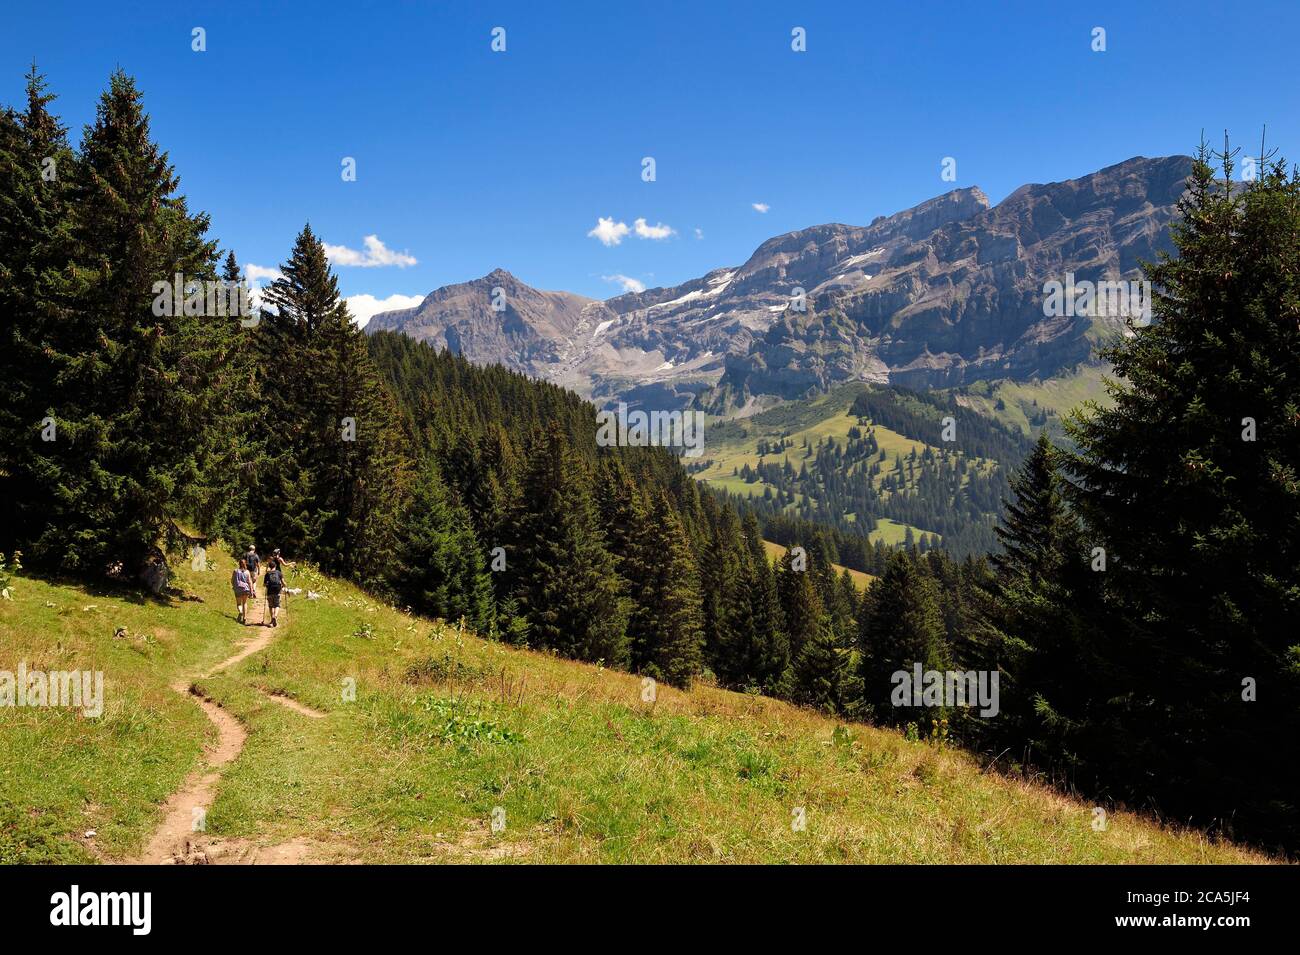 Switzerland, Canton of Vaud, Villars-sur-Ollon, hike from the Bretaye pass to the Croix pass passing through the hamlet of Ensex Stock Photo